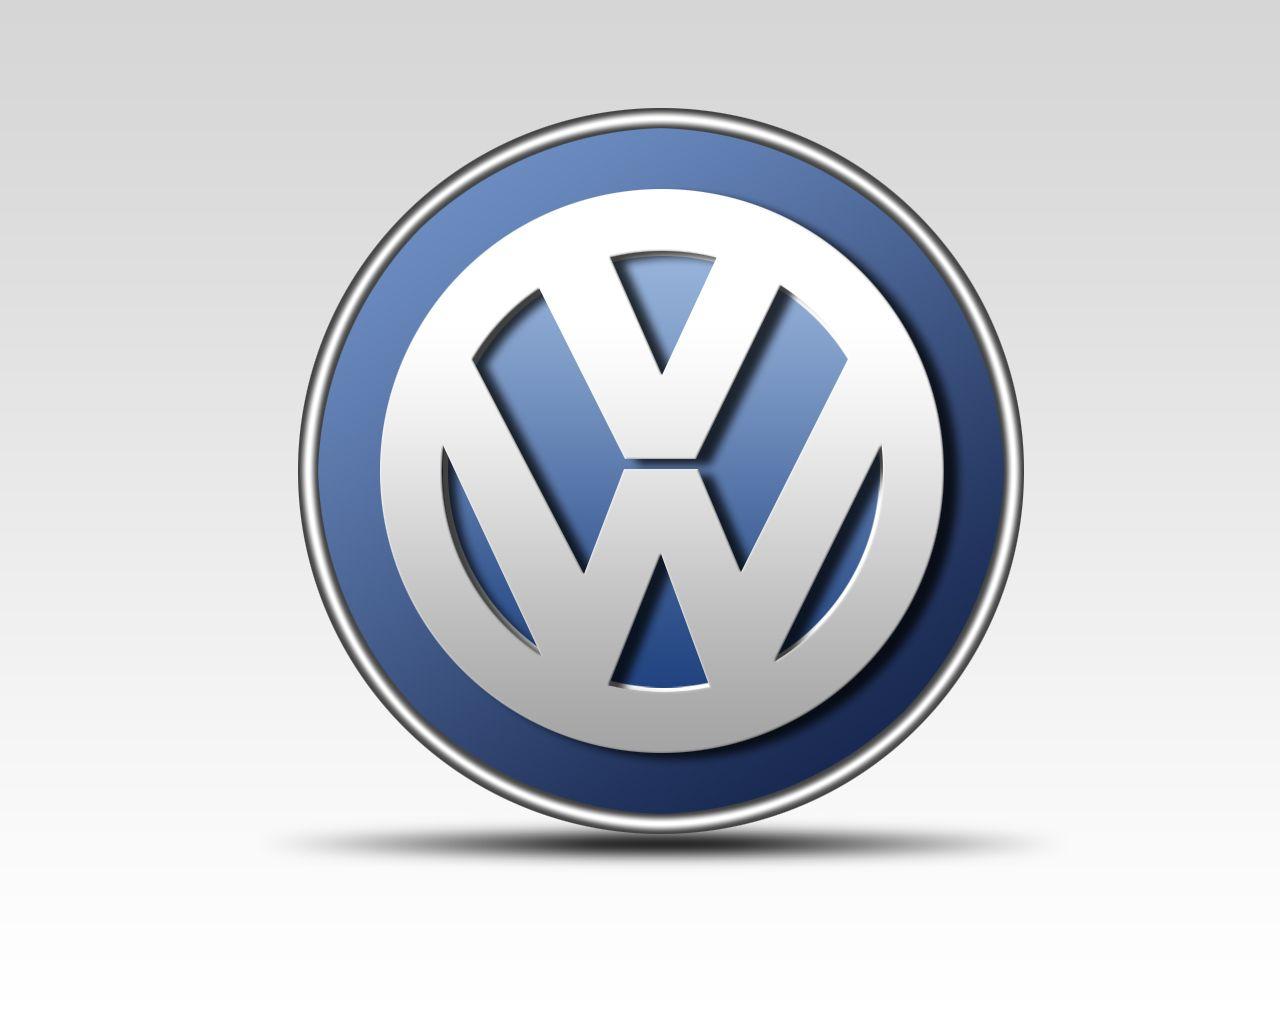 Blue and White Car Logo - Volkswagen Logo, Volkswagen Car Symbol Meaning and History | Car ...